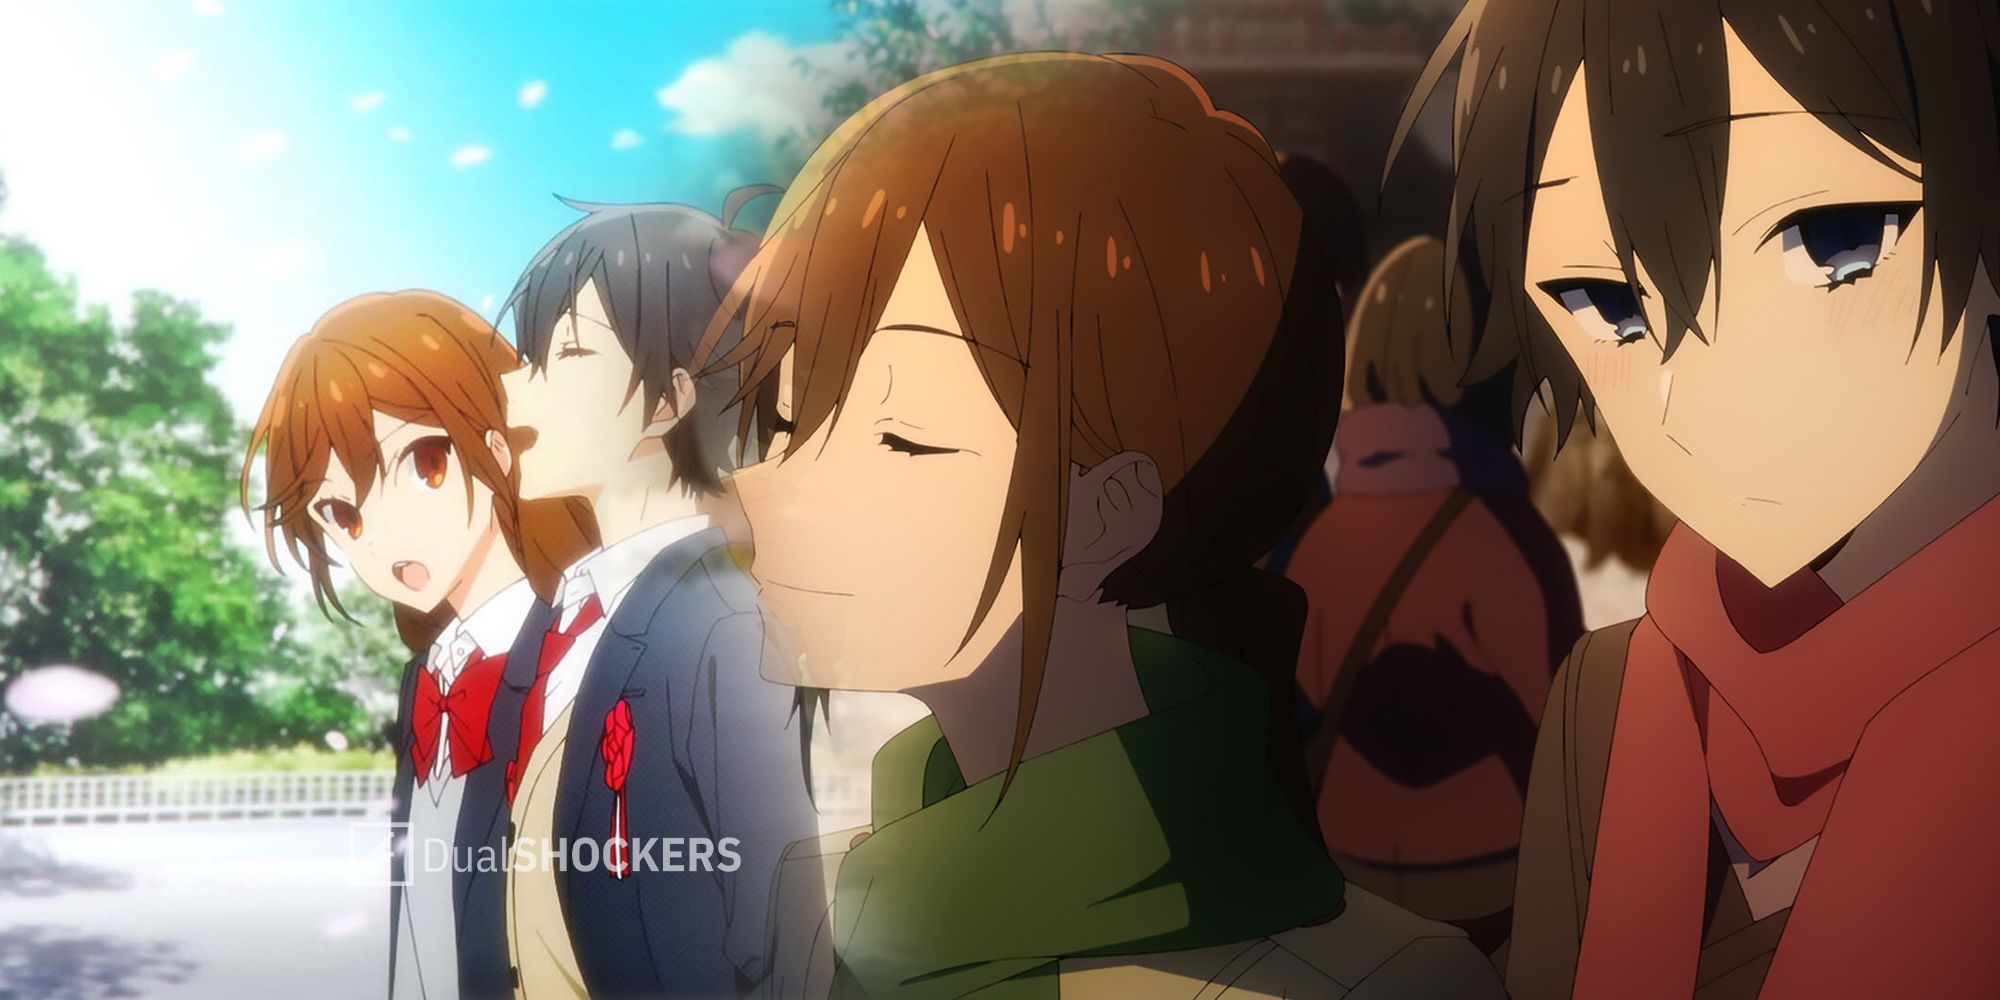 Horimiya: The Missing Piece - when is the anime adaptation releasing? Date,  time, streaming details, and more